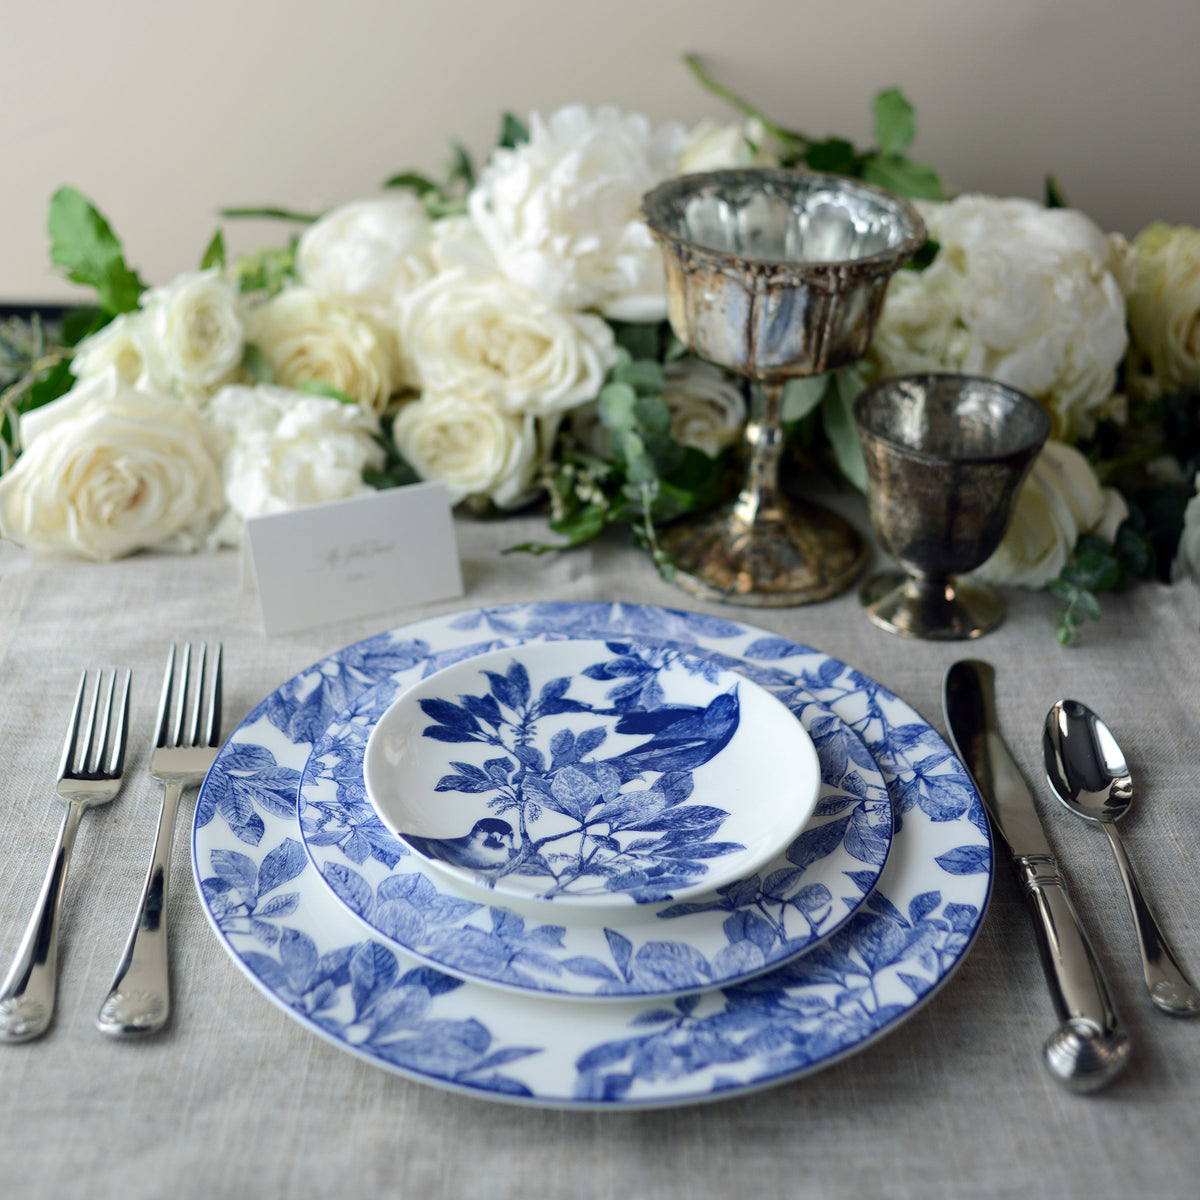 A table setting with blue and white floral-patterned plates, including a delicate Arbor Rimmed Salad Plate by Caskata Artisanal Home, silver cutlery, two ornate goblets, and a floral centerpiece of white roses and greenery. The premium porcelain dishes lend an heirloom feel to the scene. A place card is placed above the plates.